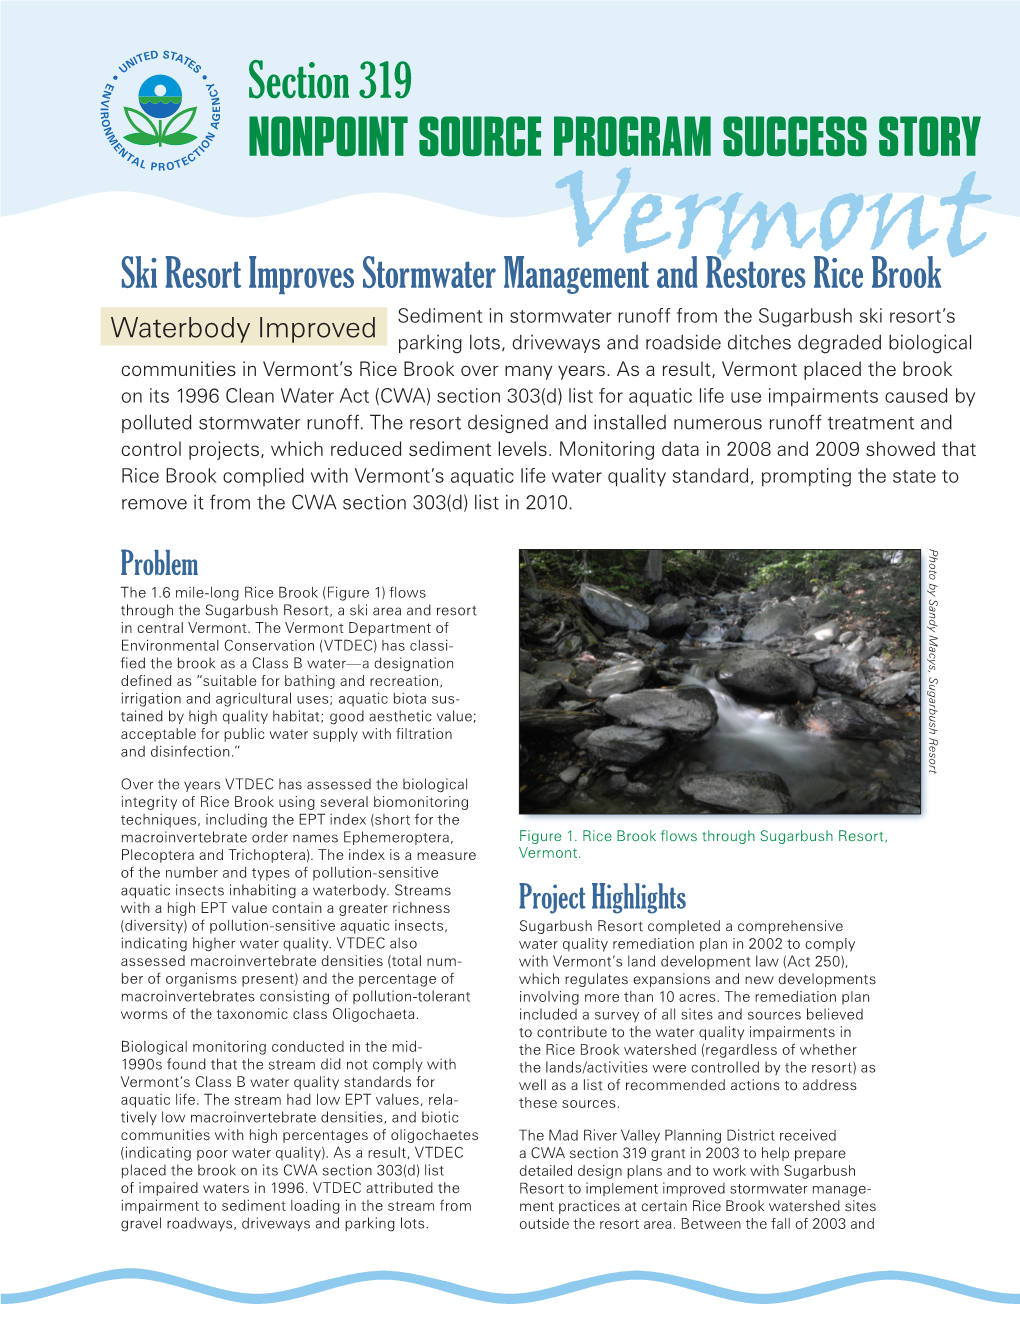 Vermont's Rice Brook, Section 319 Success Story